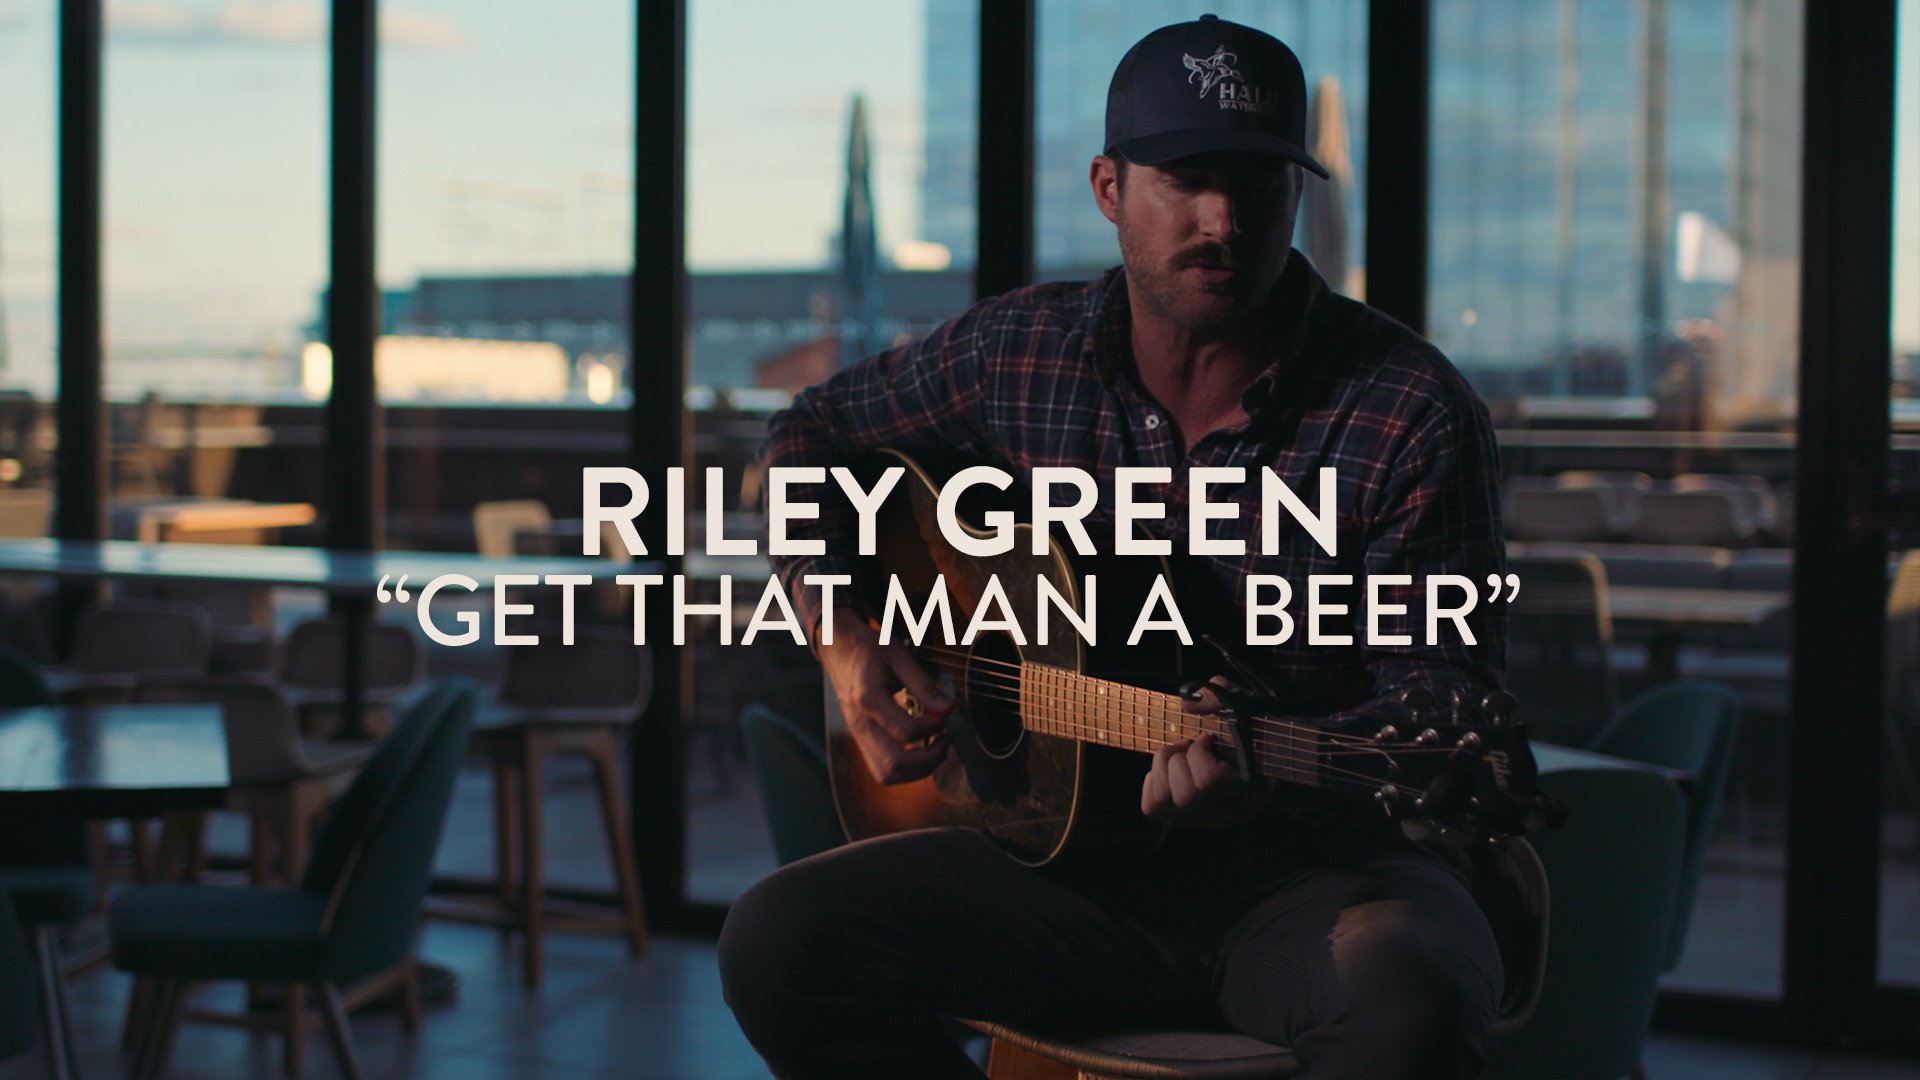 Who Is Riley Green, Anyway?